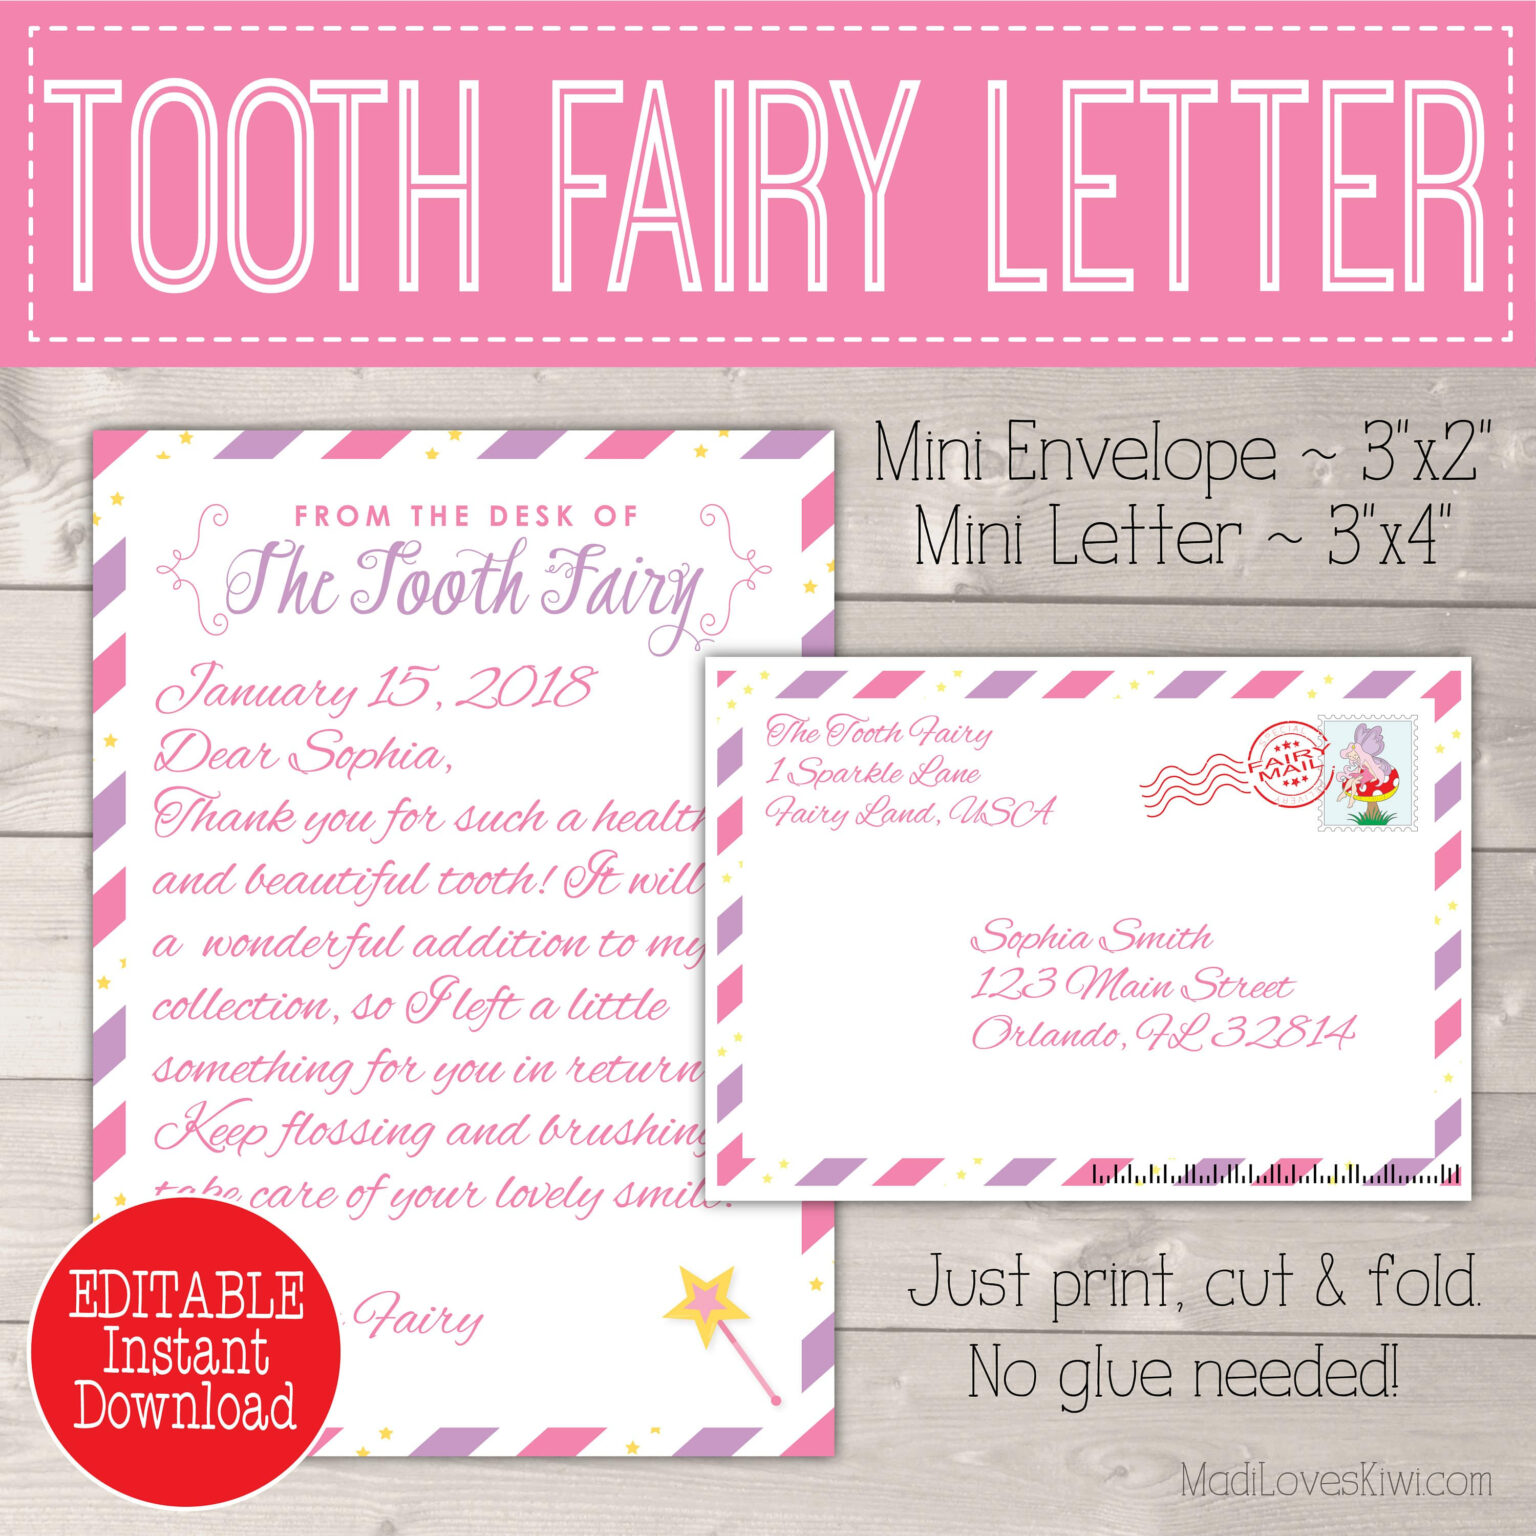 printable-tooth-fairy-letter-pdf-printable-world-holiday